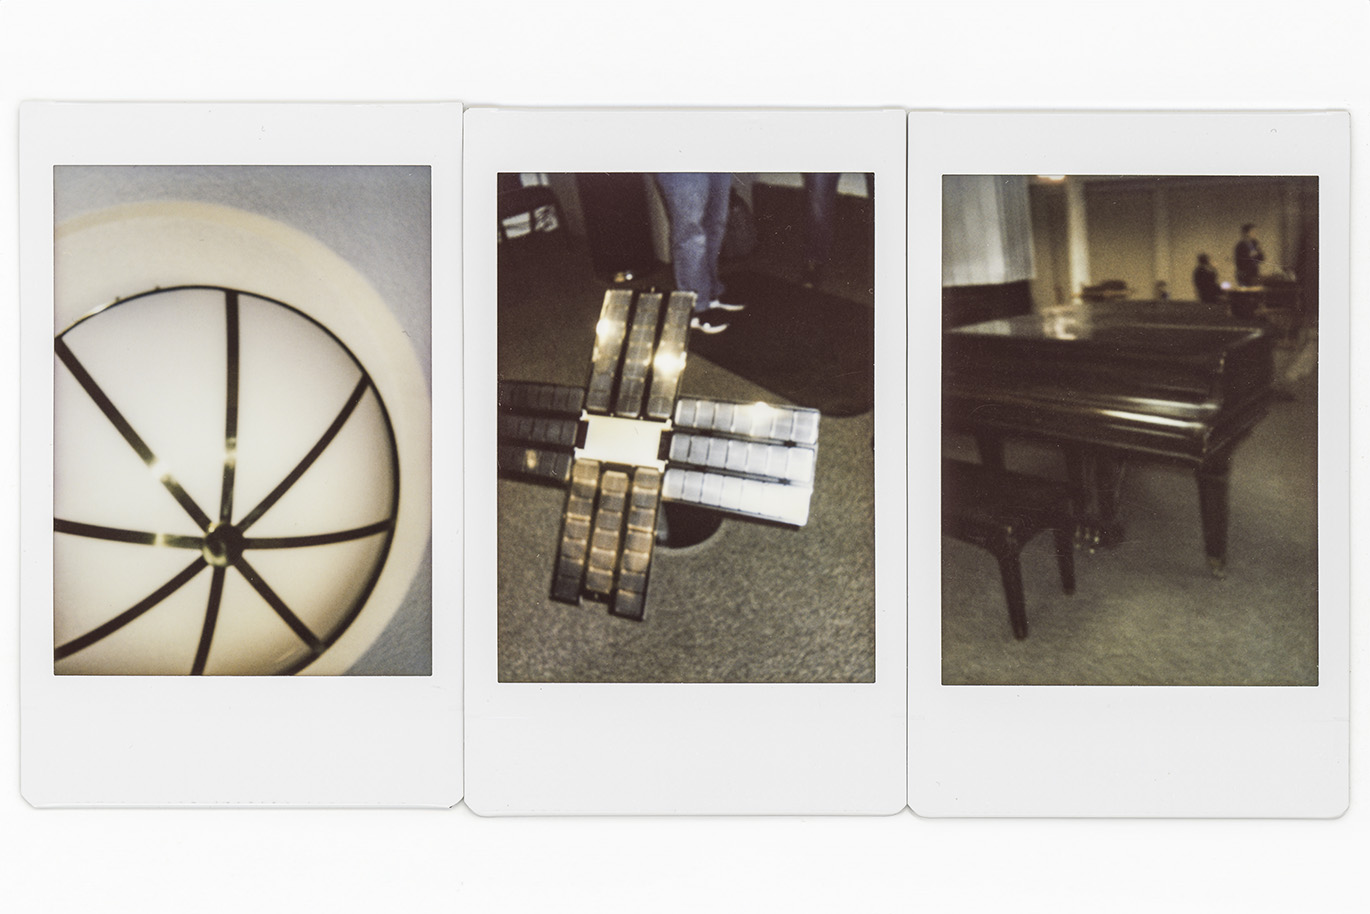 Set of three scanned polaroid photos showing a light fixture, satellite like object and a piano.